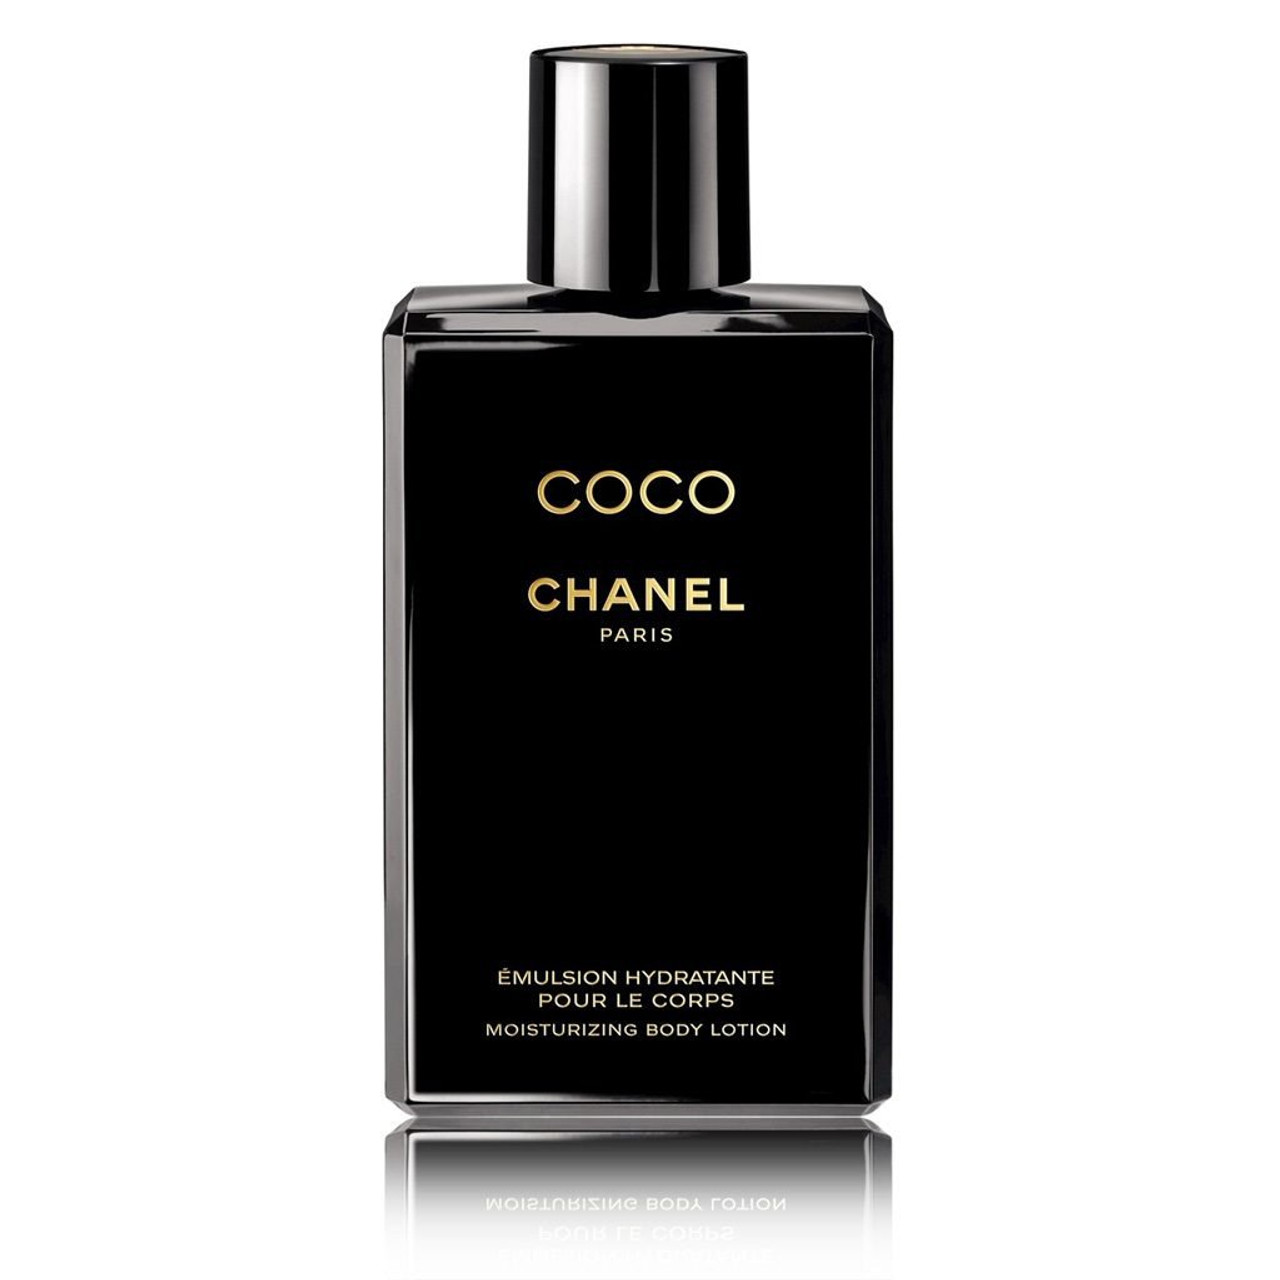 CHANEL Coco mademoiselle fresh body lotion - Reviews